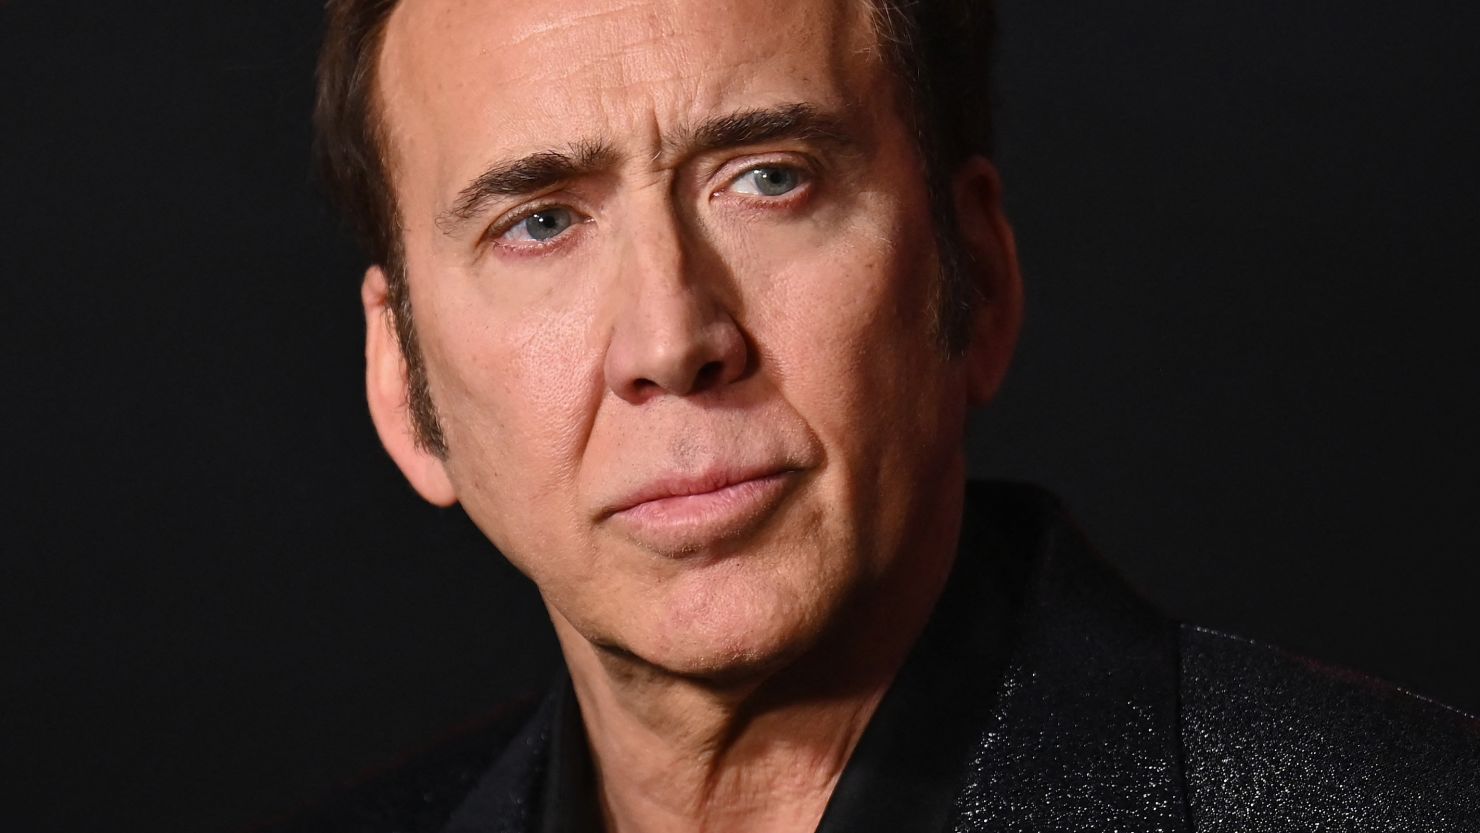 US actor Nicolas Cage attends the premiere of "Renfield" in New York City on March 28, 2023. (Photo by ANGELA WEISS / AFP) (Photo by ANGELA WEISS/AFP via Getty Images)